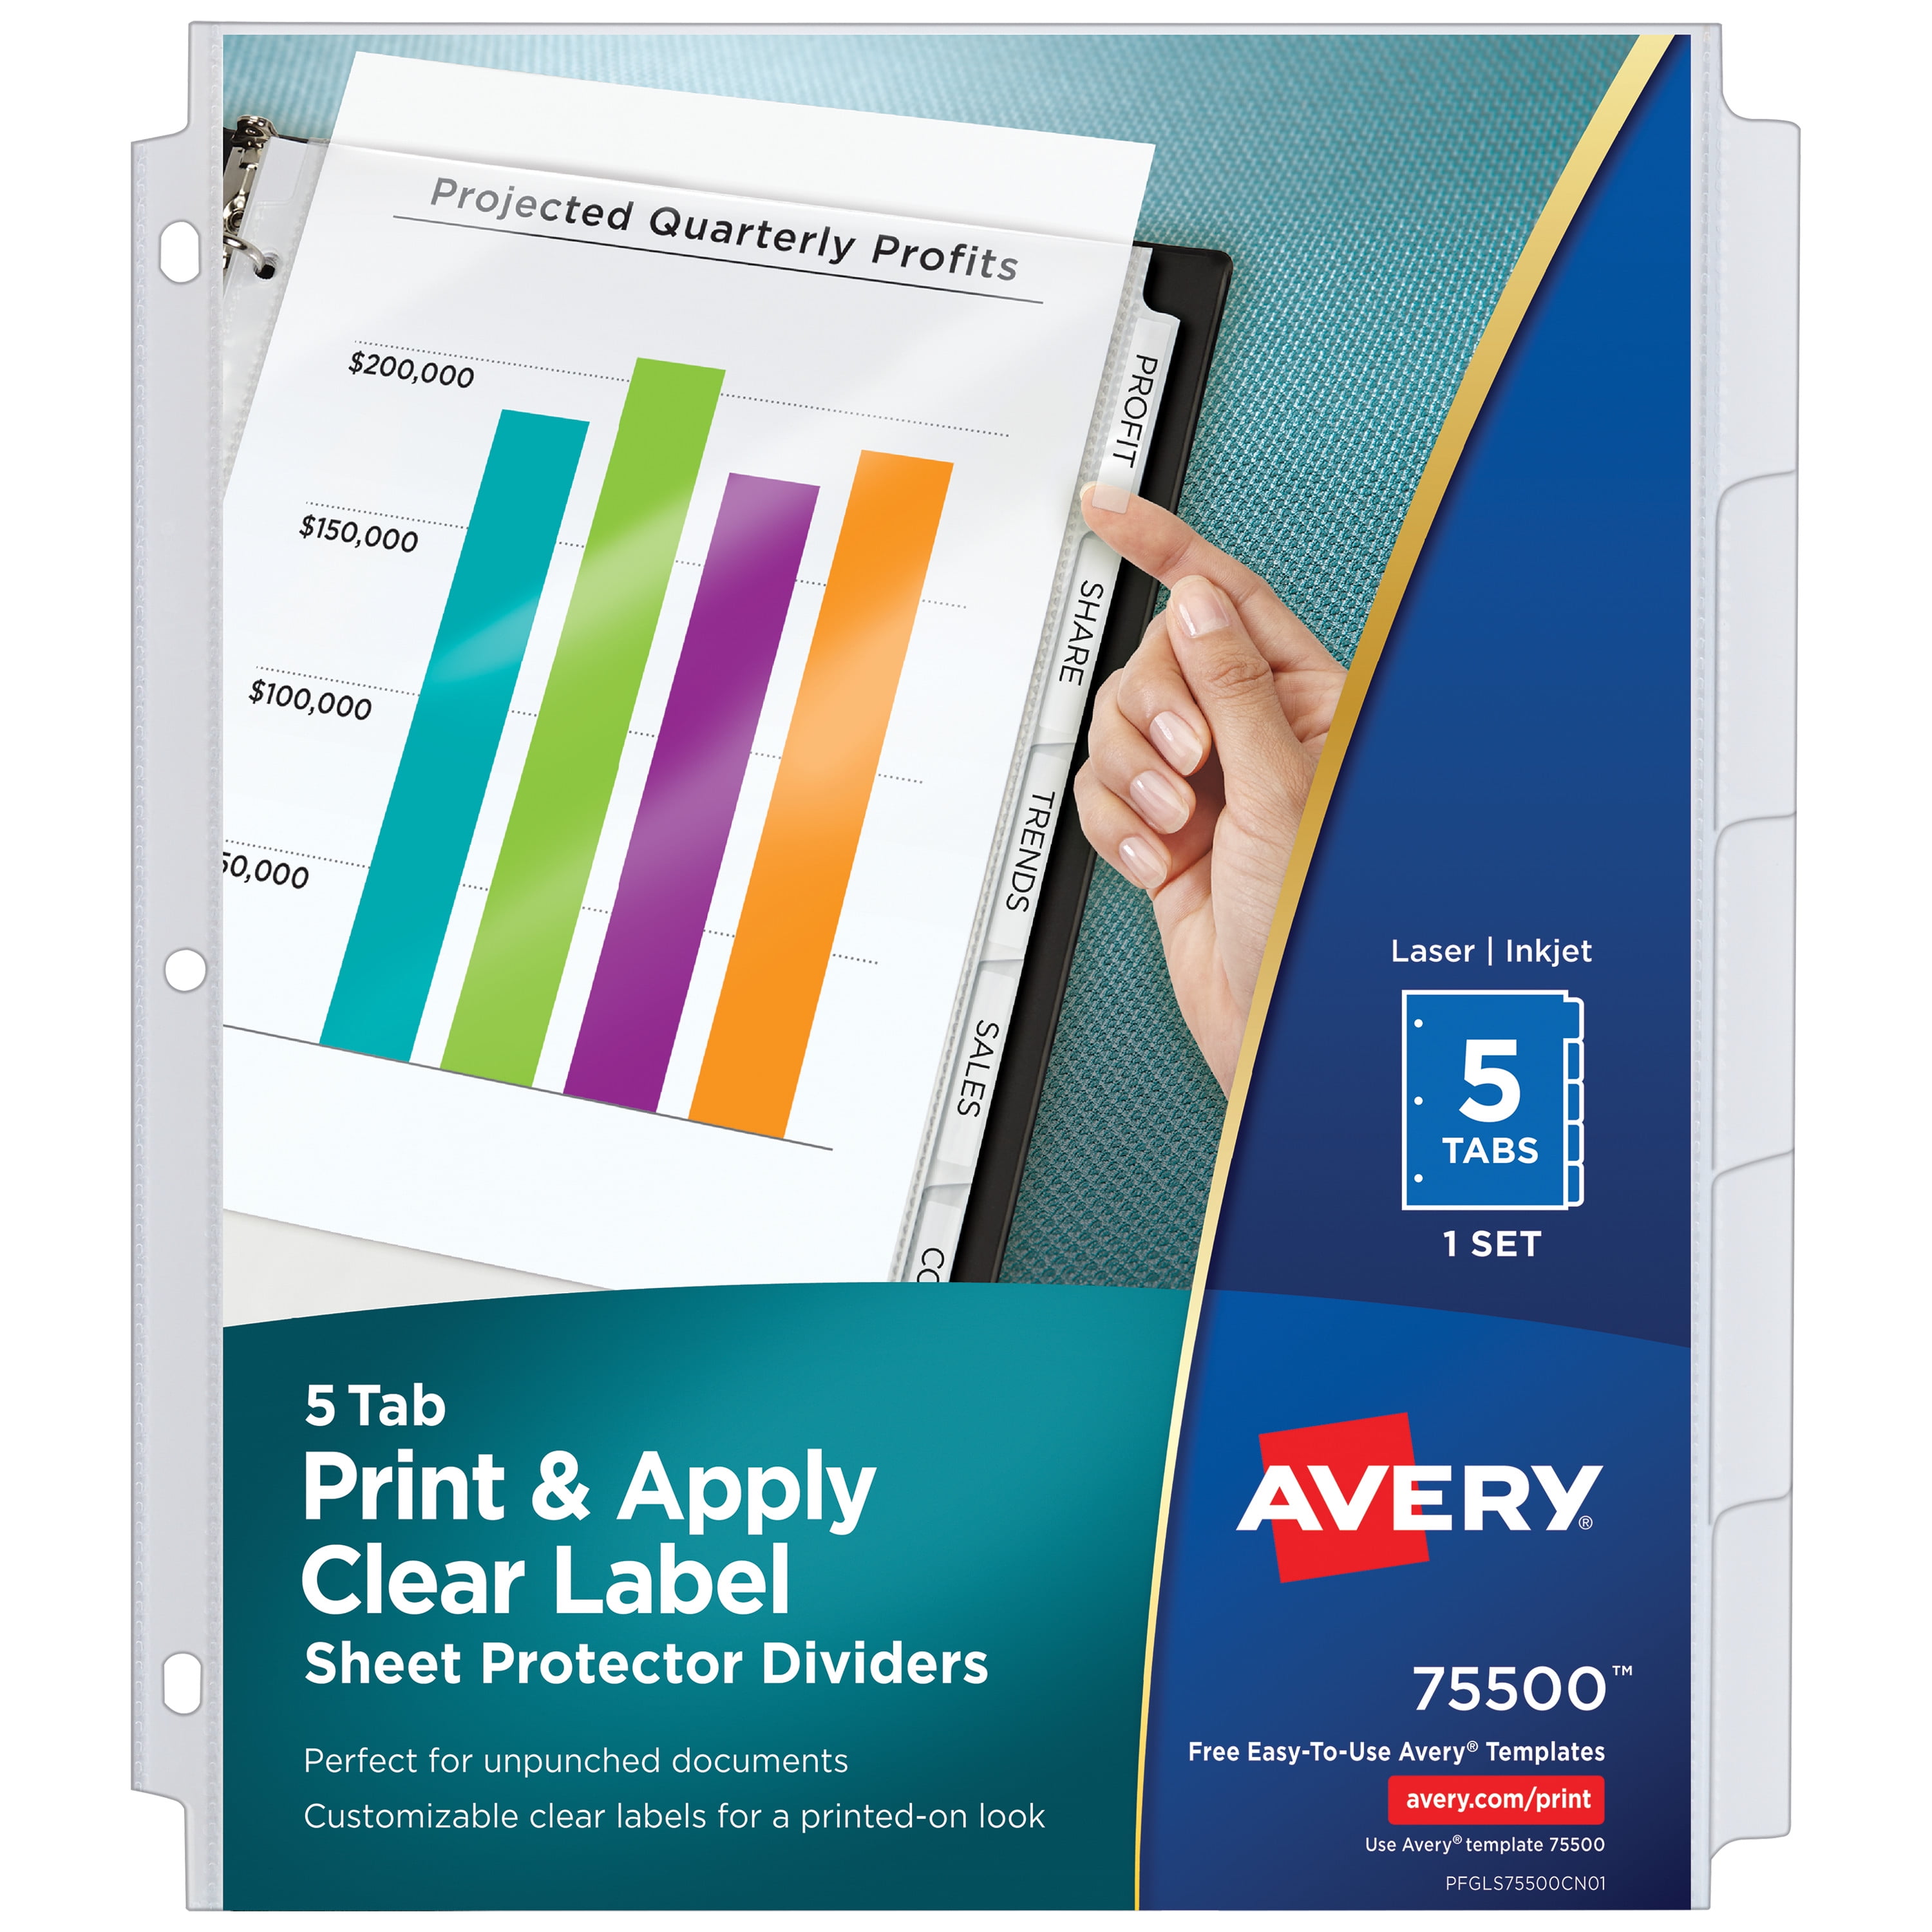 1 Set Index Maker Multicolor Tabs Avery 5-Tab Binder Dividers 11406 Easy Print & Apply Clear Label Strip 